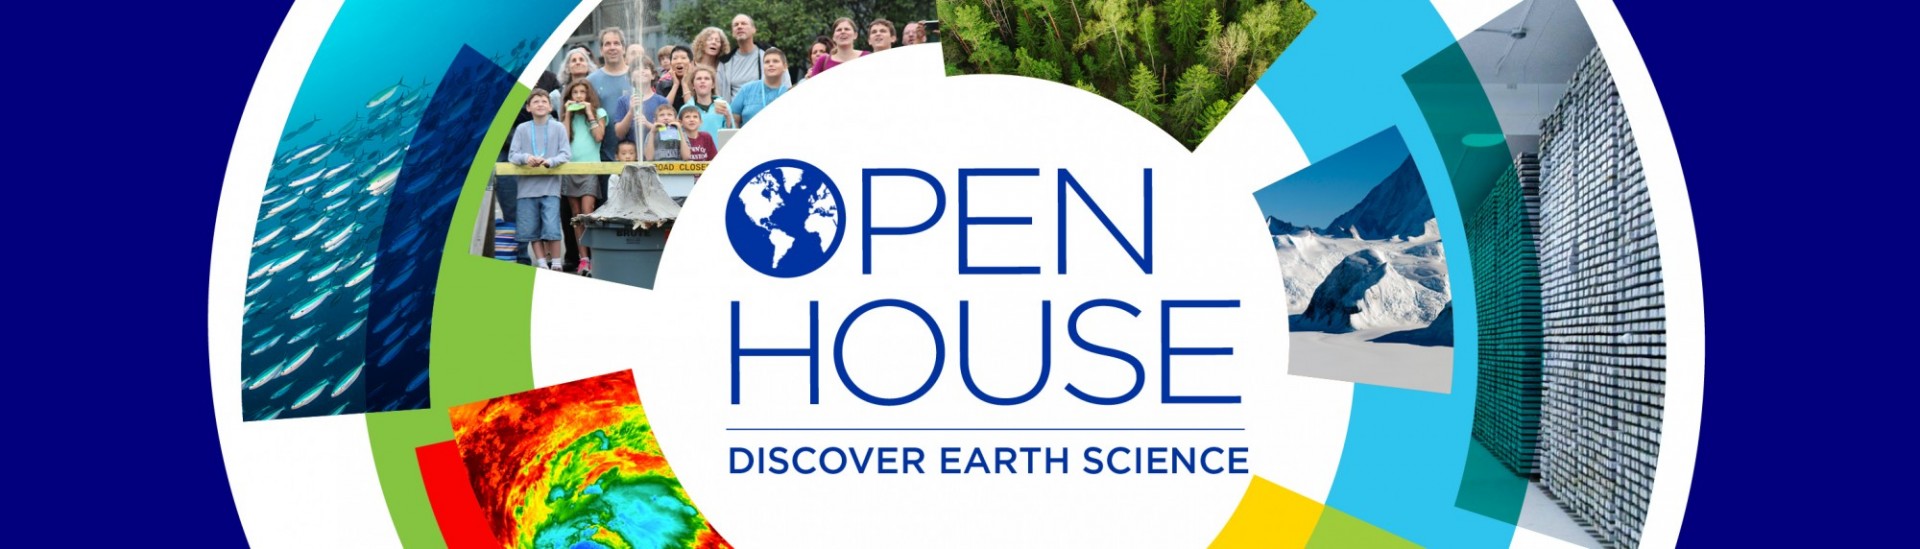 Open House - Discover Earth Science